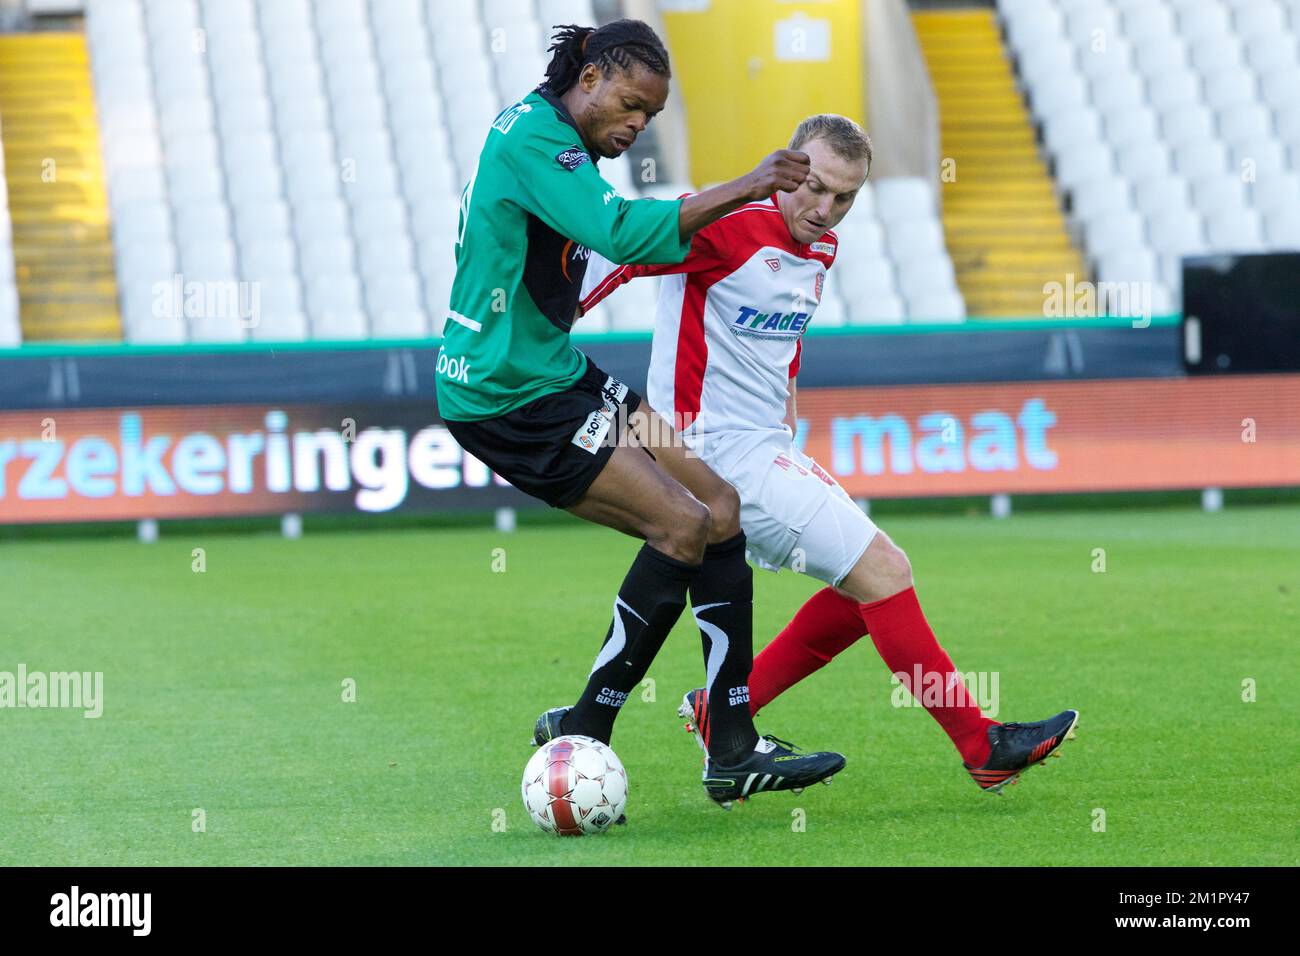 Cercle's Michael Uchebo fights for the ball during the match between Cercle Brugge and Mouscron-Peruwelz, in Brugge, Thursday 23 May 2013, on the fifth day of the final round in the second division league of the Belgian soccer championship. BELGA PHOTO KURT DESPLENTER Stock Photo